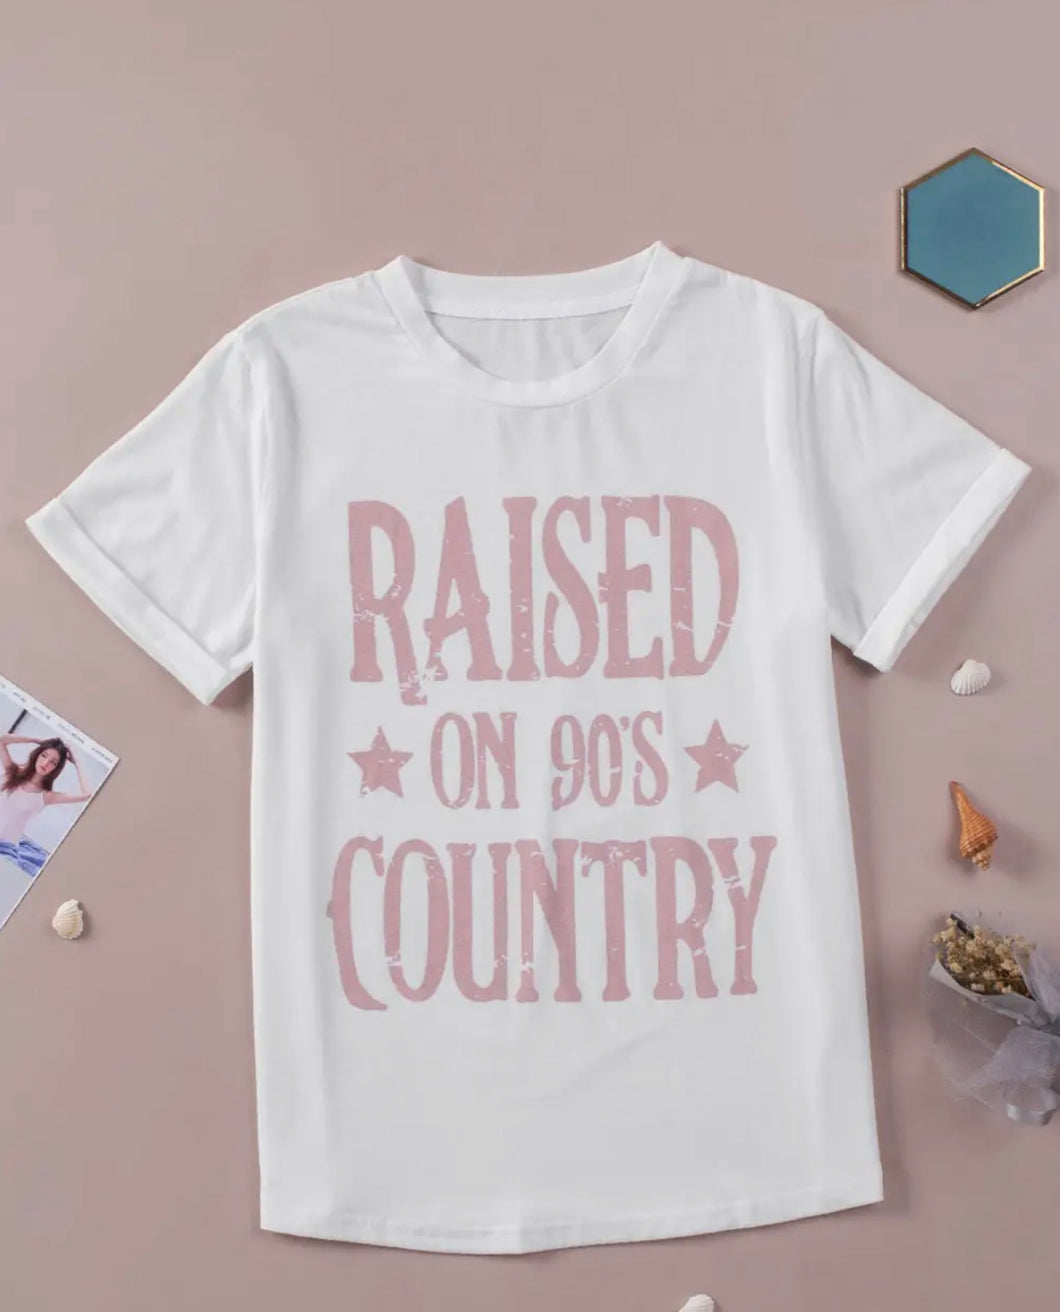 Raised on 90s Country t-shirt